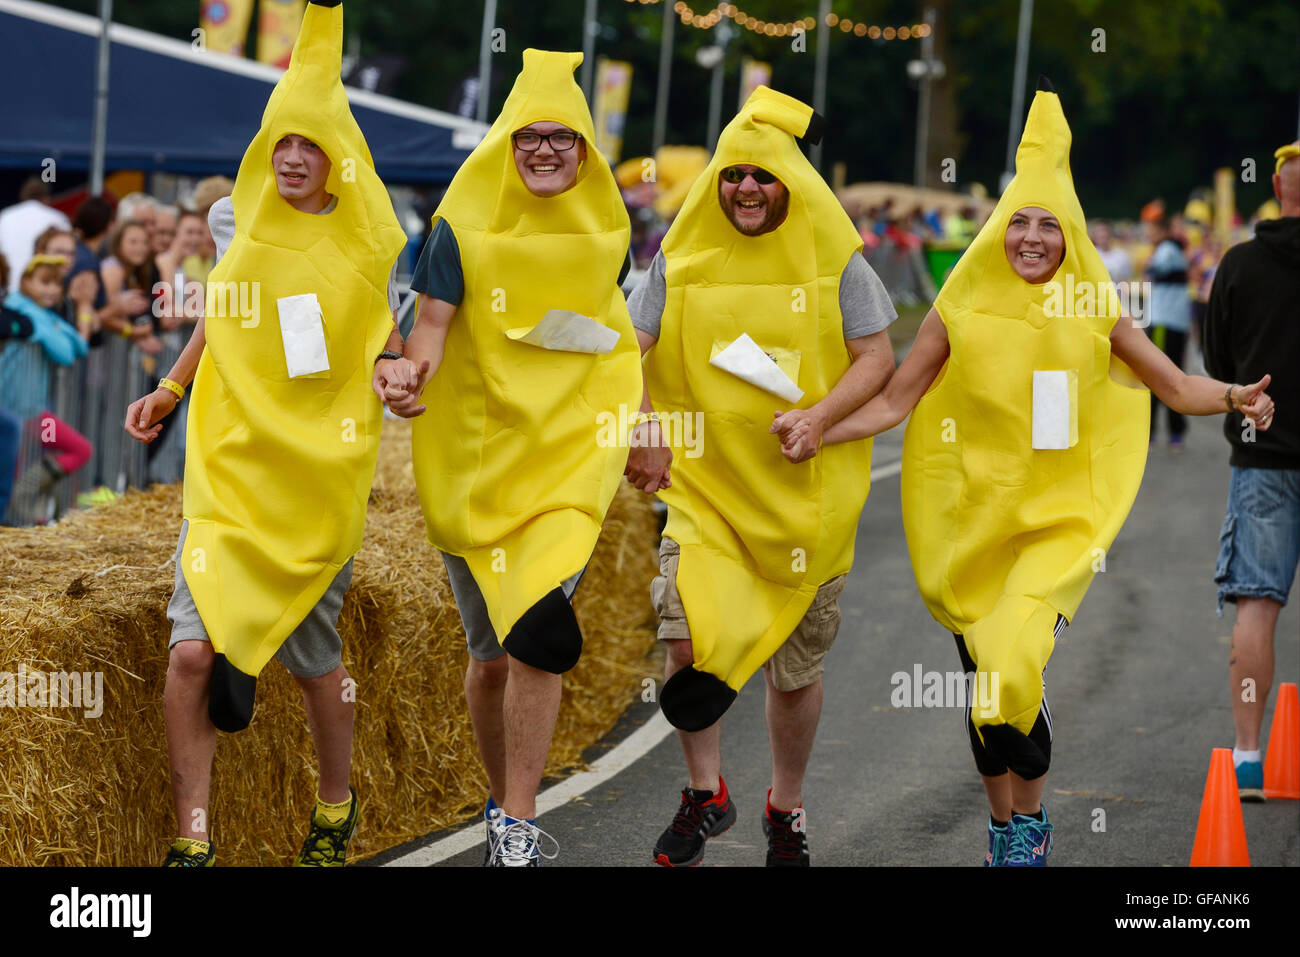 Carfest North, Bolesworth, Cheshire, UK. 30th July, 2016. Four competitors dressed as bananas completing the Great Festival Dash fun run in aid of Children In Need. The event is the brainchild of Chris Evans and features 3 days of cars, music and entertainment with profits being donated to the charity Children in Need. Credit:  Andrew Paterson/Alamy Live News Stock Photo